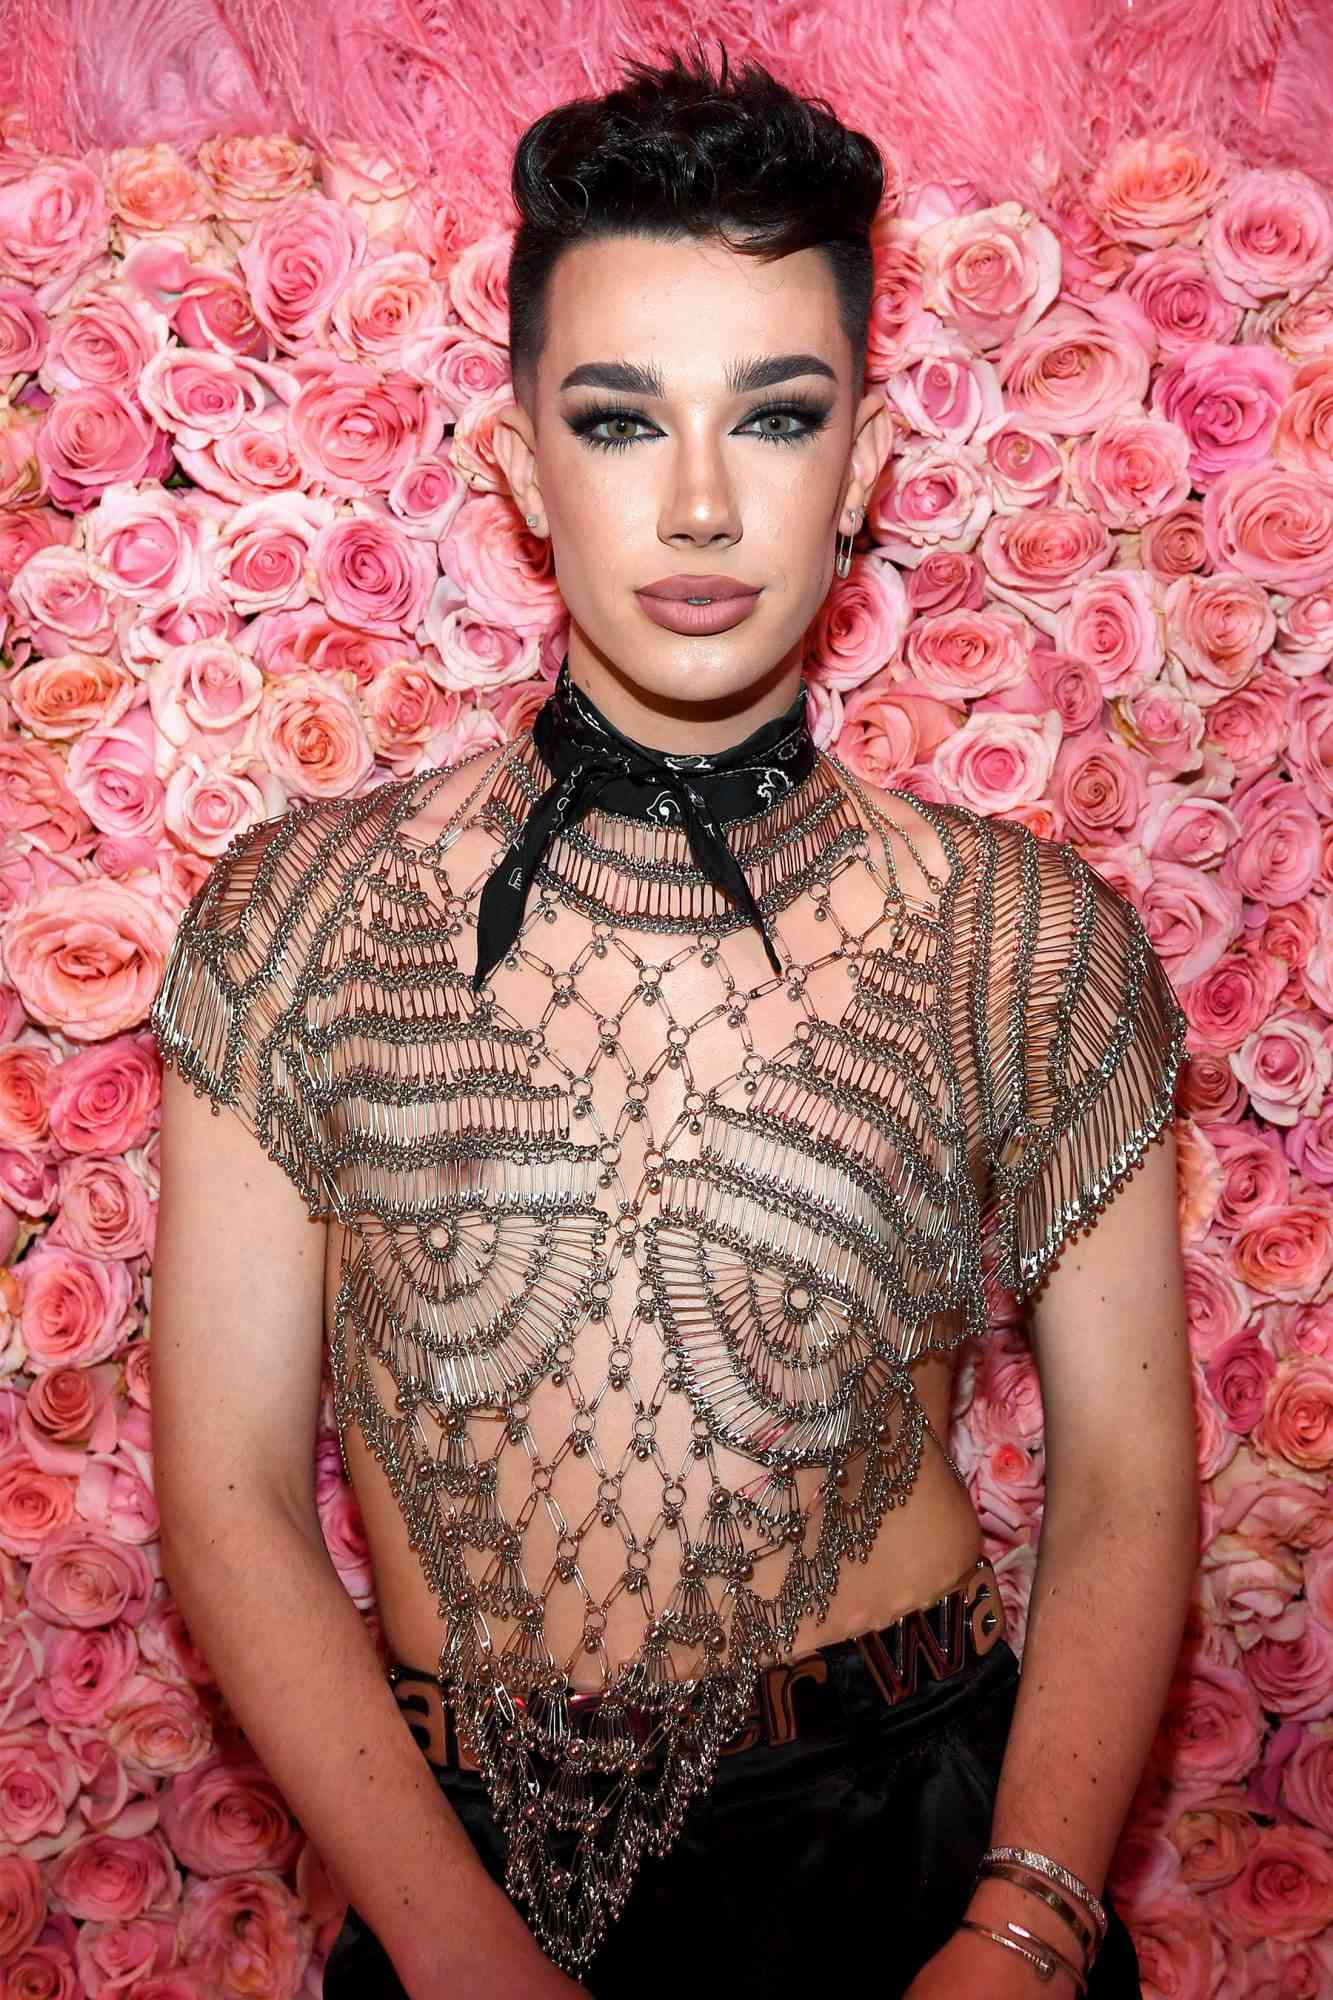 andy linehan recommends james charles nude pics pic